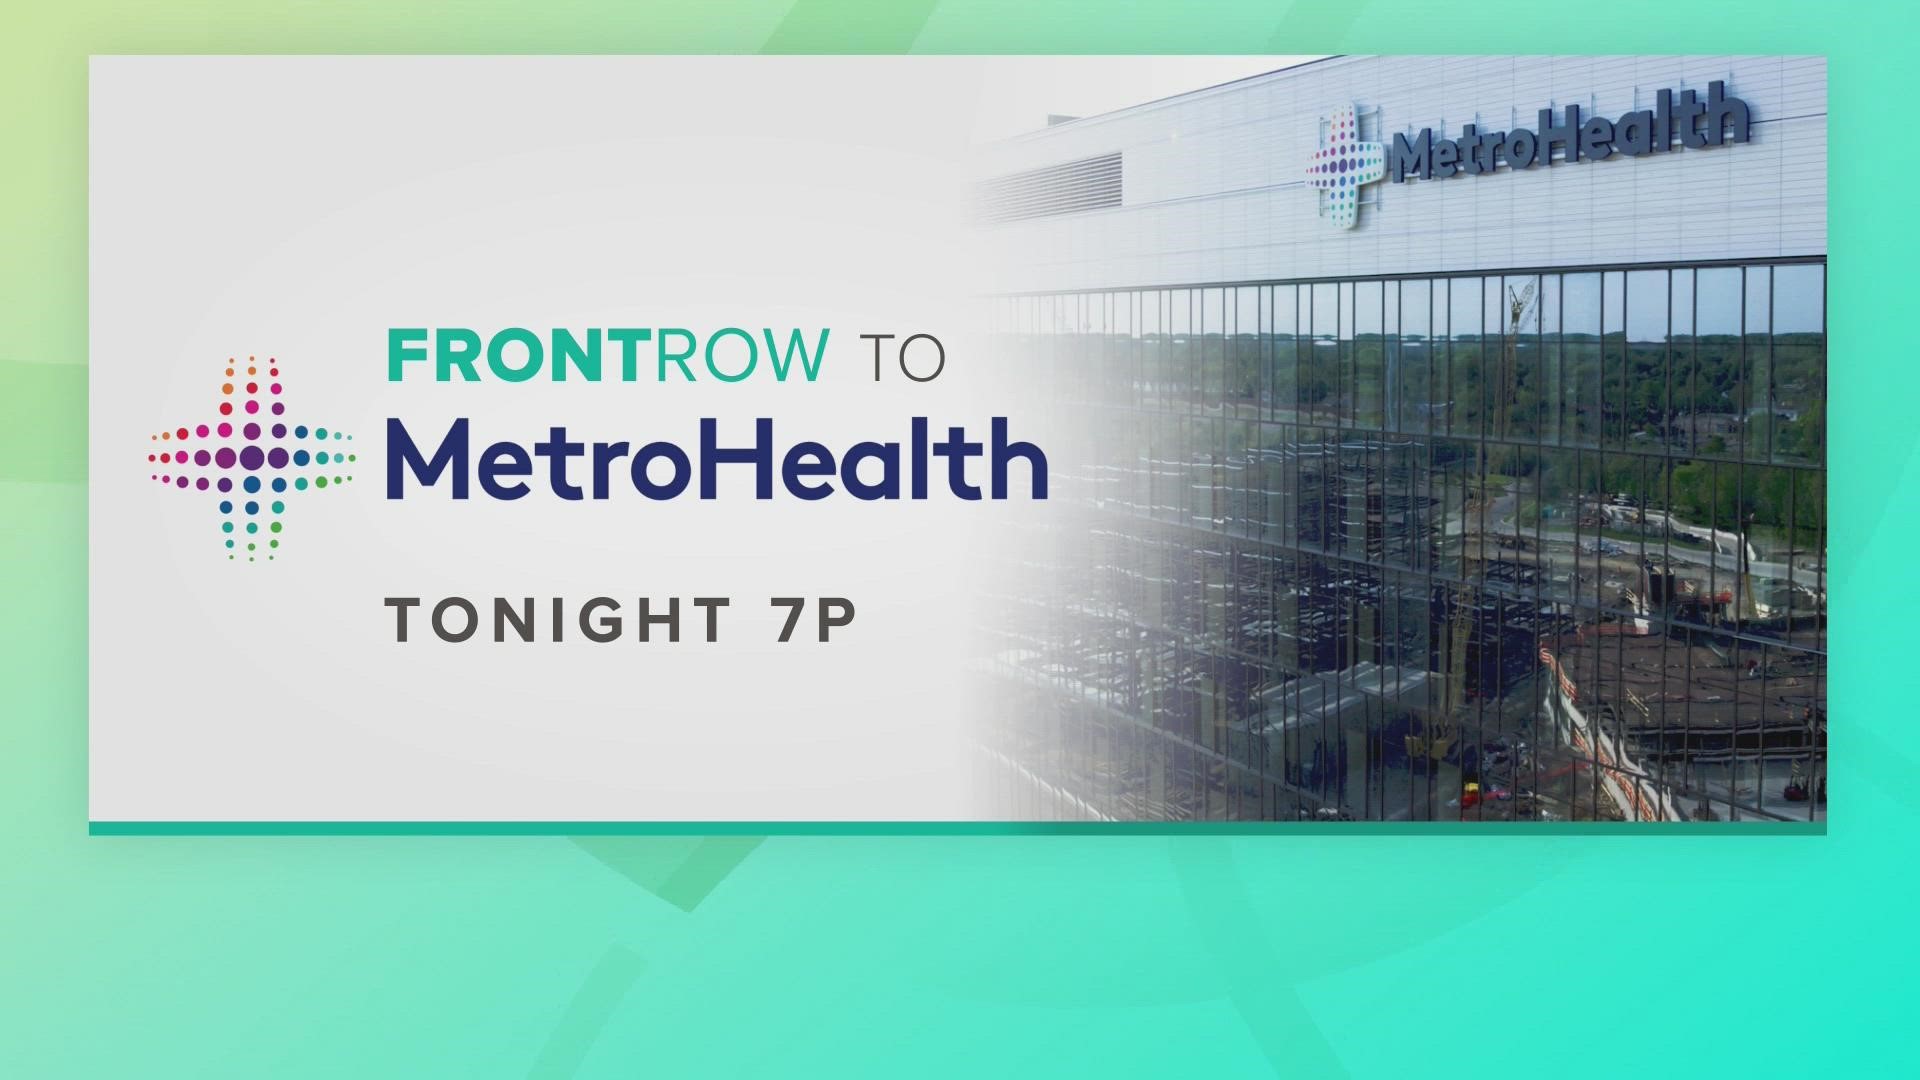 3News' senior health correspondent will host a half-hour special Friday at 7 p.m. on how the hospital system is impacting Northeast Ohio.